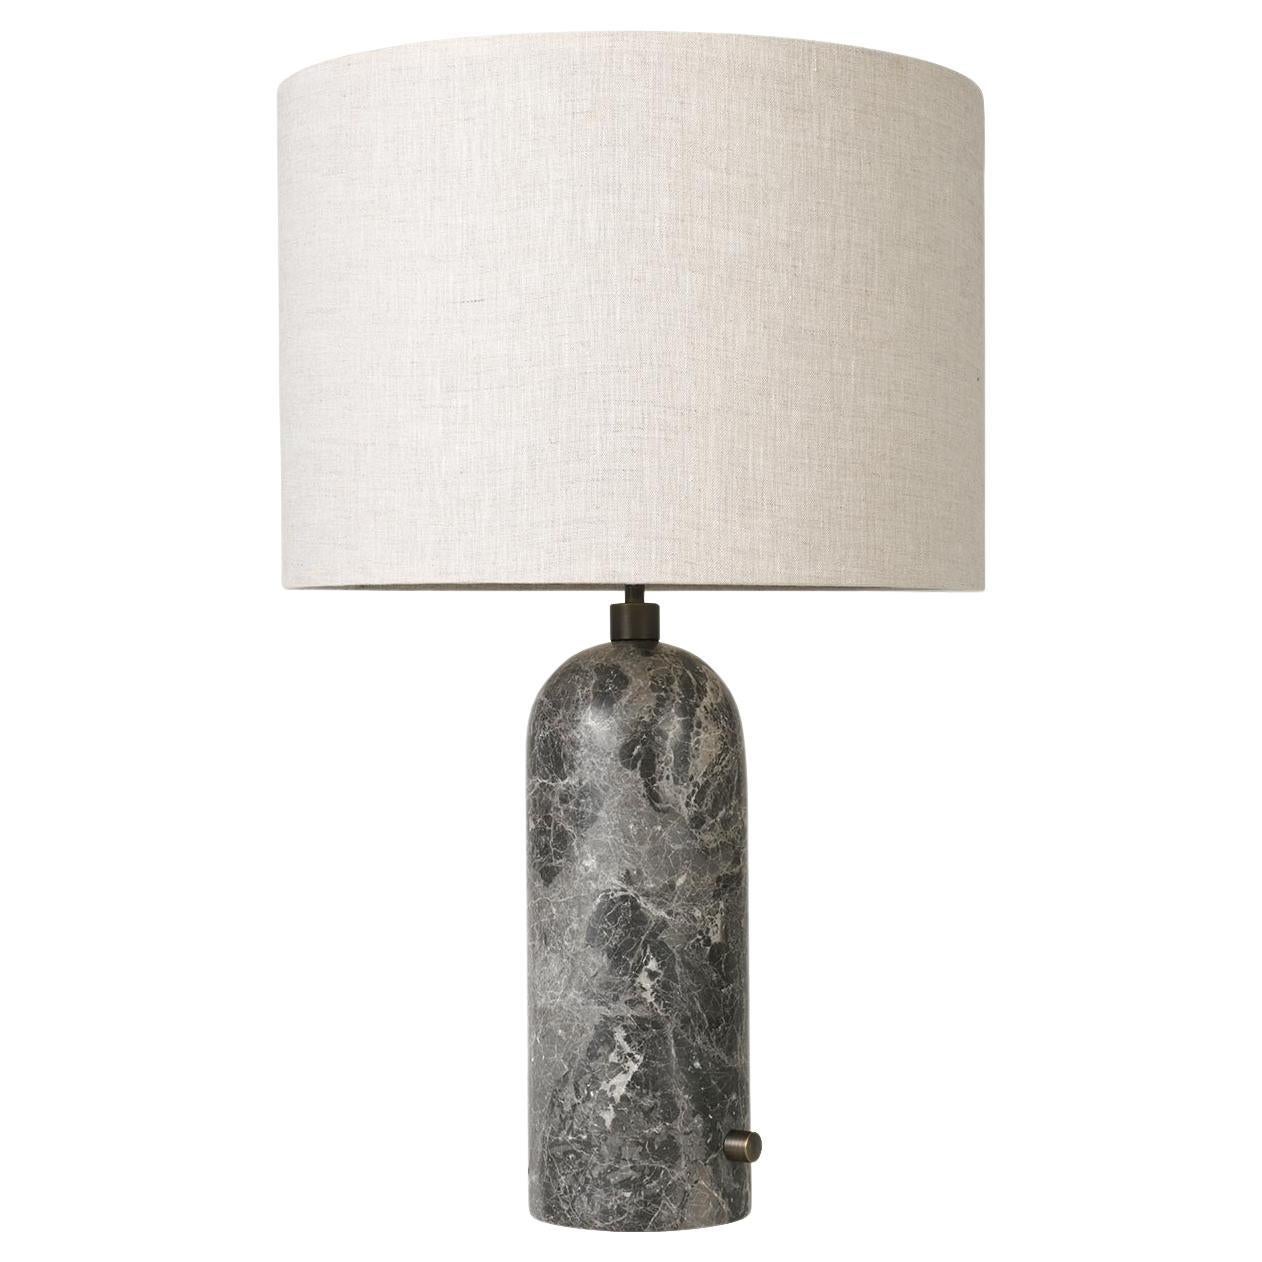 Gravity Table Lamp - Large, Grey Marble, Canvas